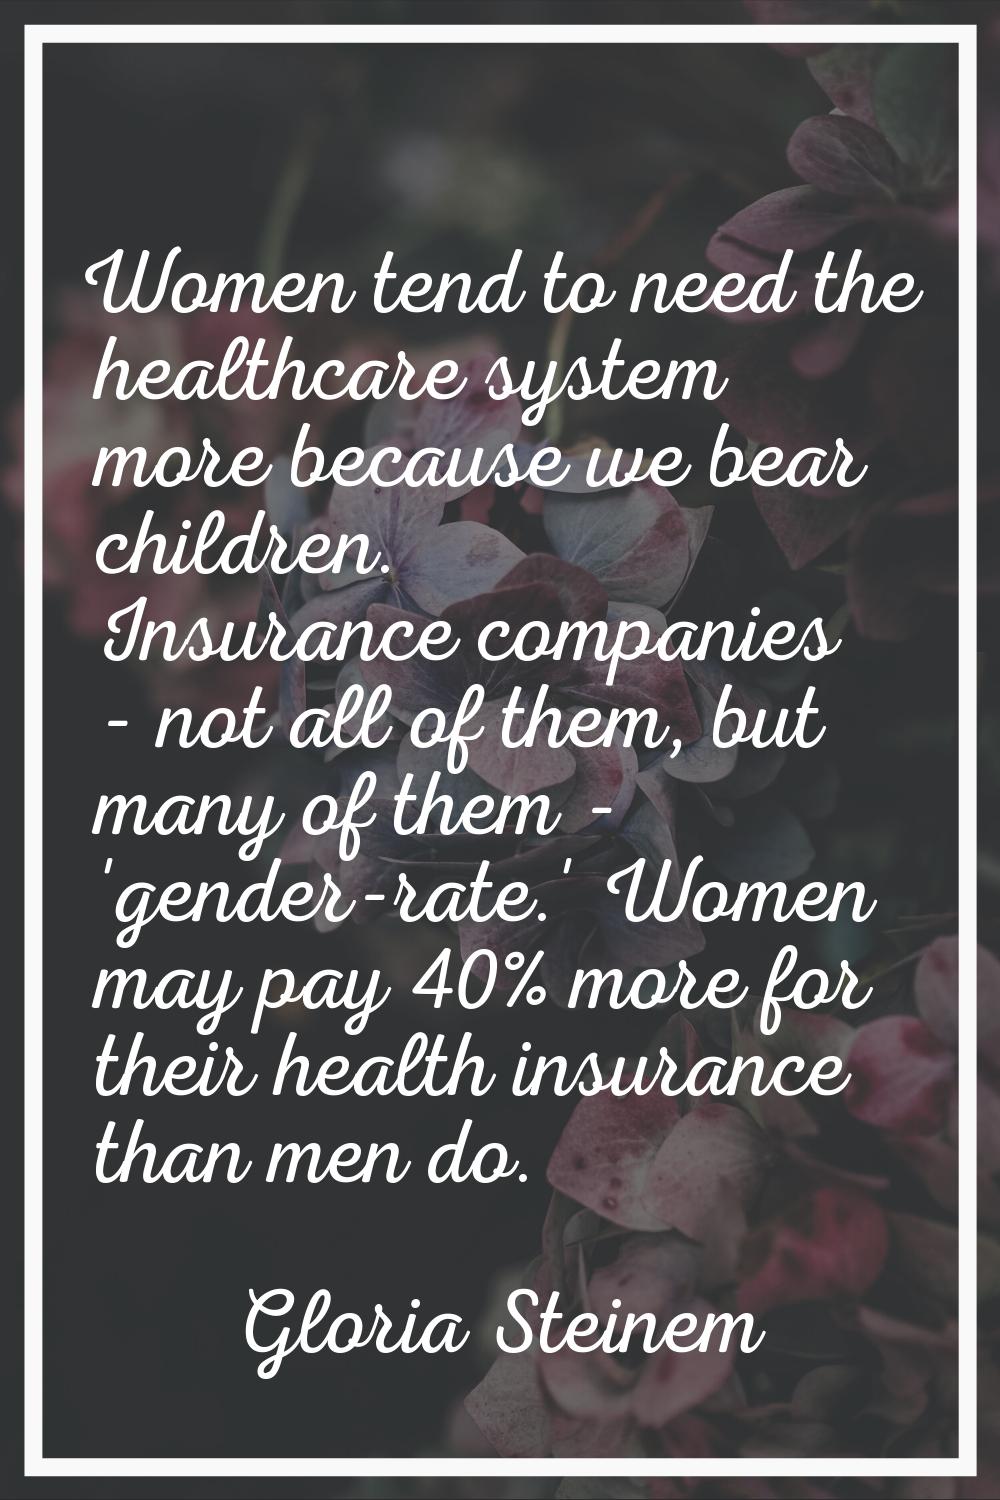 Women tend to need the healthcare system more because we bear children. Insurance companies - not a